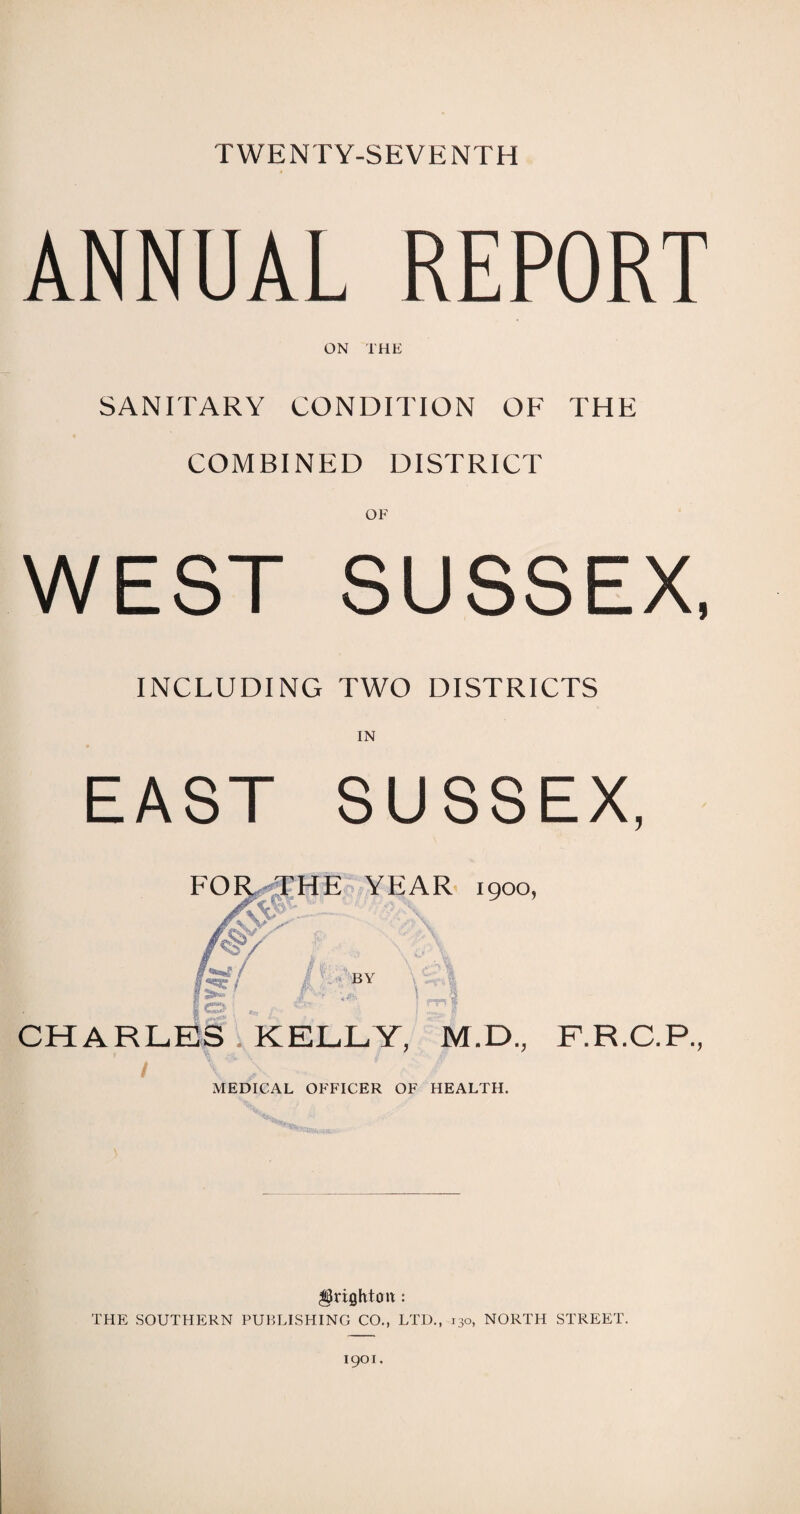 TWENTY-SEVENTH ANNUAL REPORT ON THE SANITARY CONDITION OF THE COMBINED DISTRICT WEST SUSSEX, INCLUDING TWO DISTRICTS IN EAST SUSSEX, FOR THE YEAR 1900, 'v i by : rrl CHARLES . KELLY, M.D., F.R.C.P., M 'fc \ ' A MEDICAL OFFICER OF HEALTH. Brighton: THE SOUTHERN PUBLISHING CO., LTD., 130, NORTH STREET.